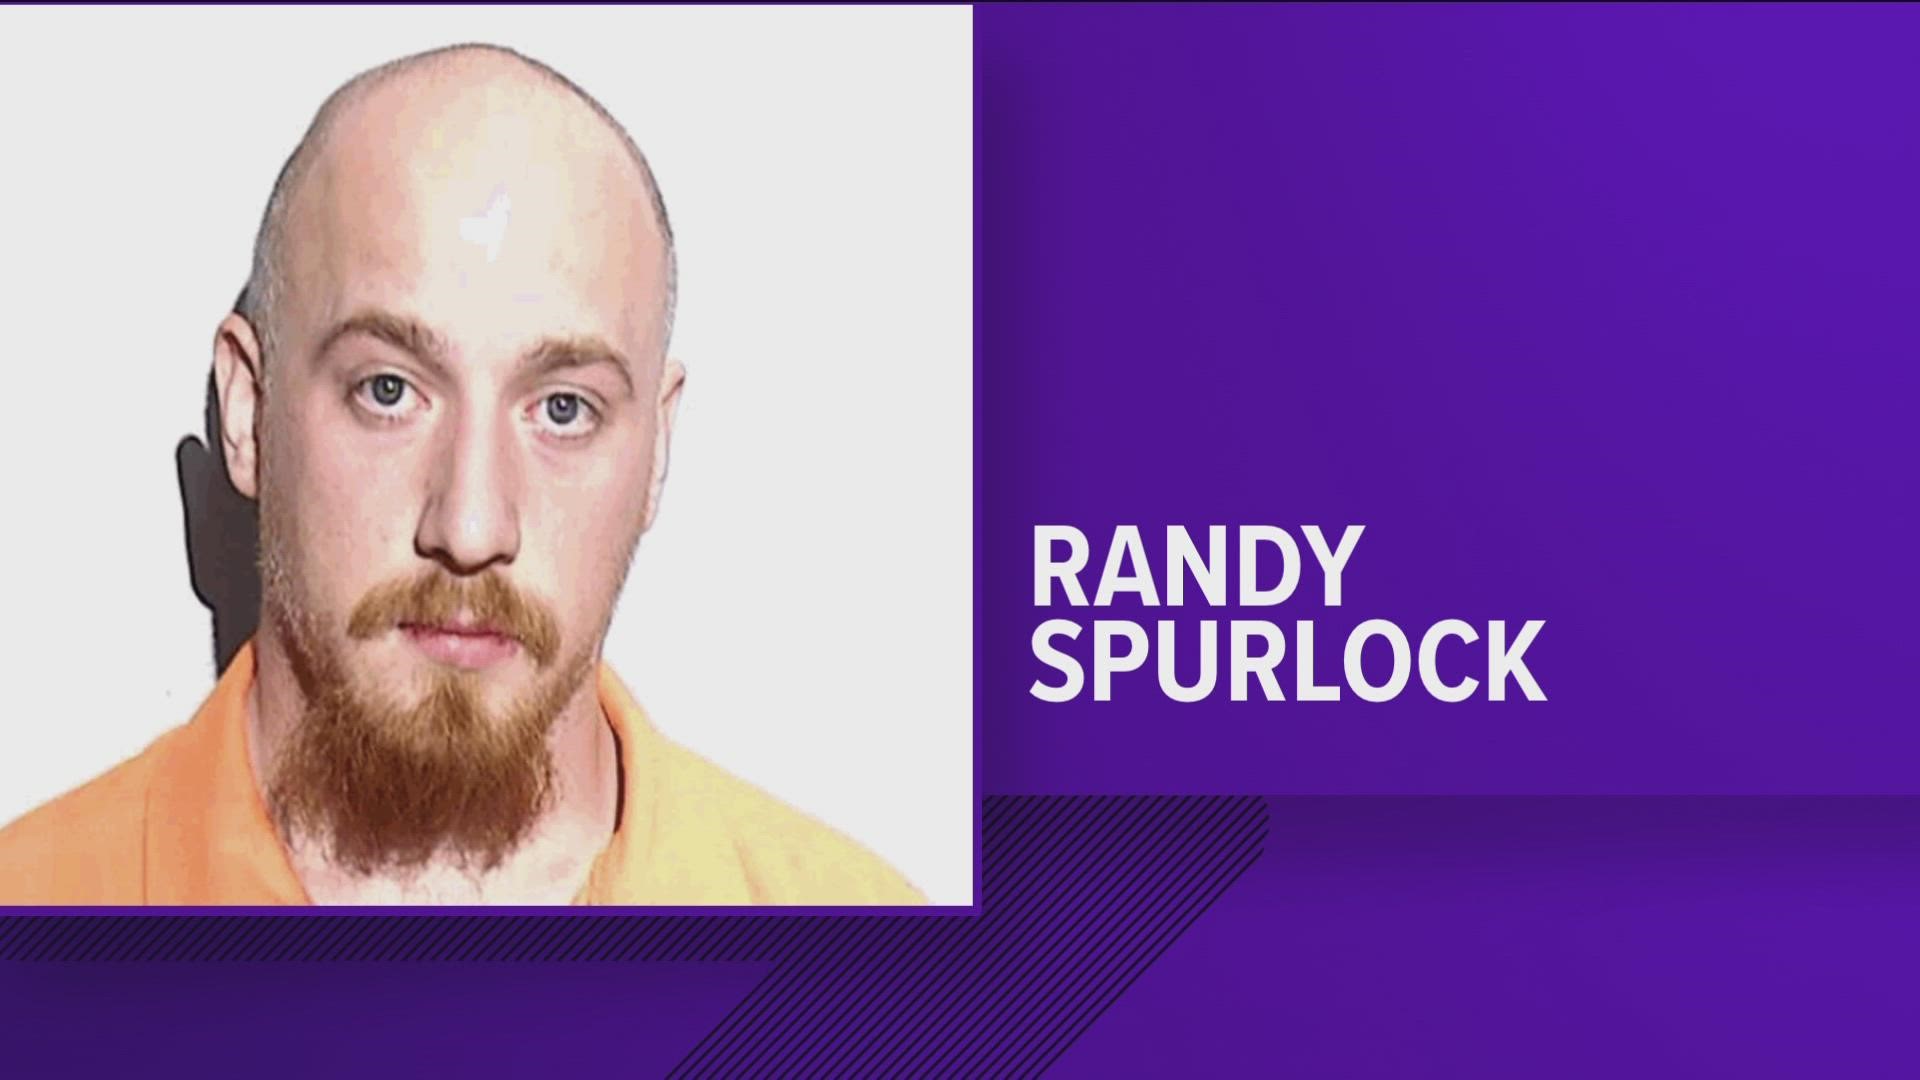 Scott Gallagher was fatally shot at the corner of City Park and Greene Street the night of July 4, police say. Randy Spurlock was indicted for murder Wednesday.